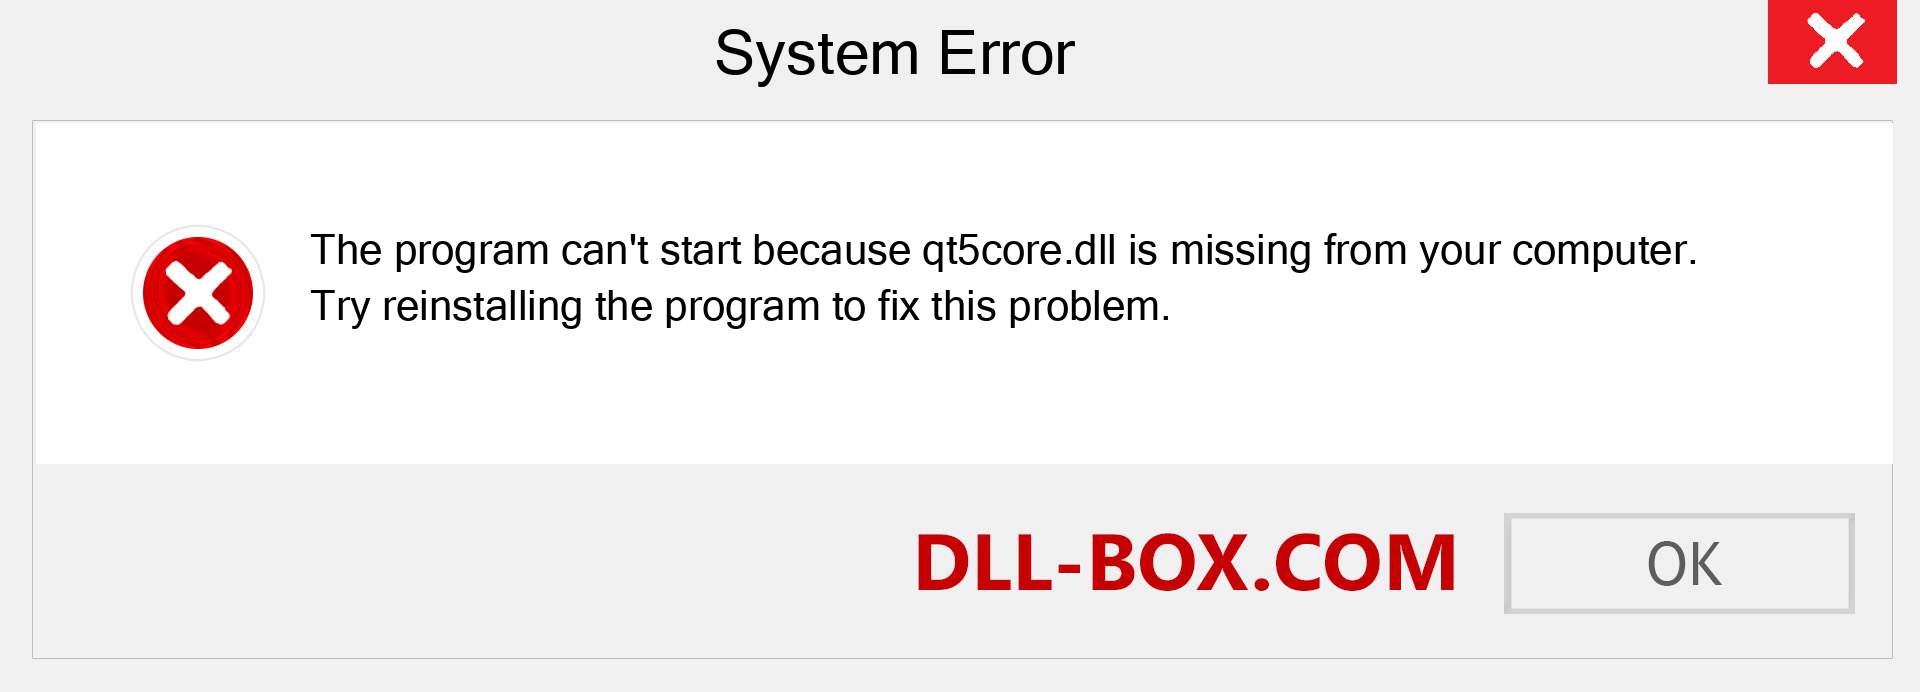  qt5core.dll file is missing?. Download for Windows 7, 8, 10 - Fix  qt5core dll Missing Error on Windows, photos, images